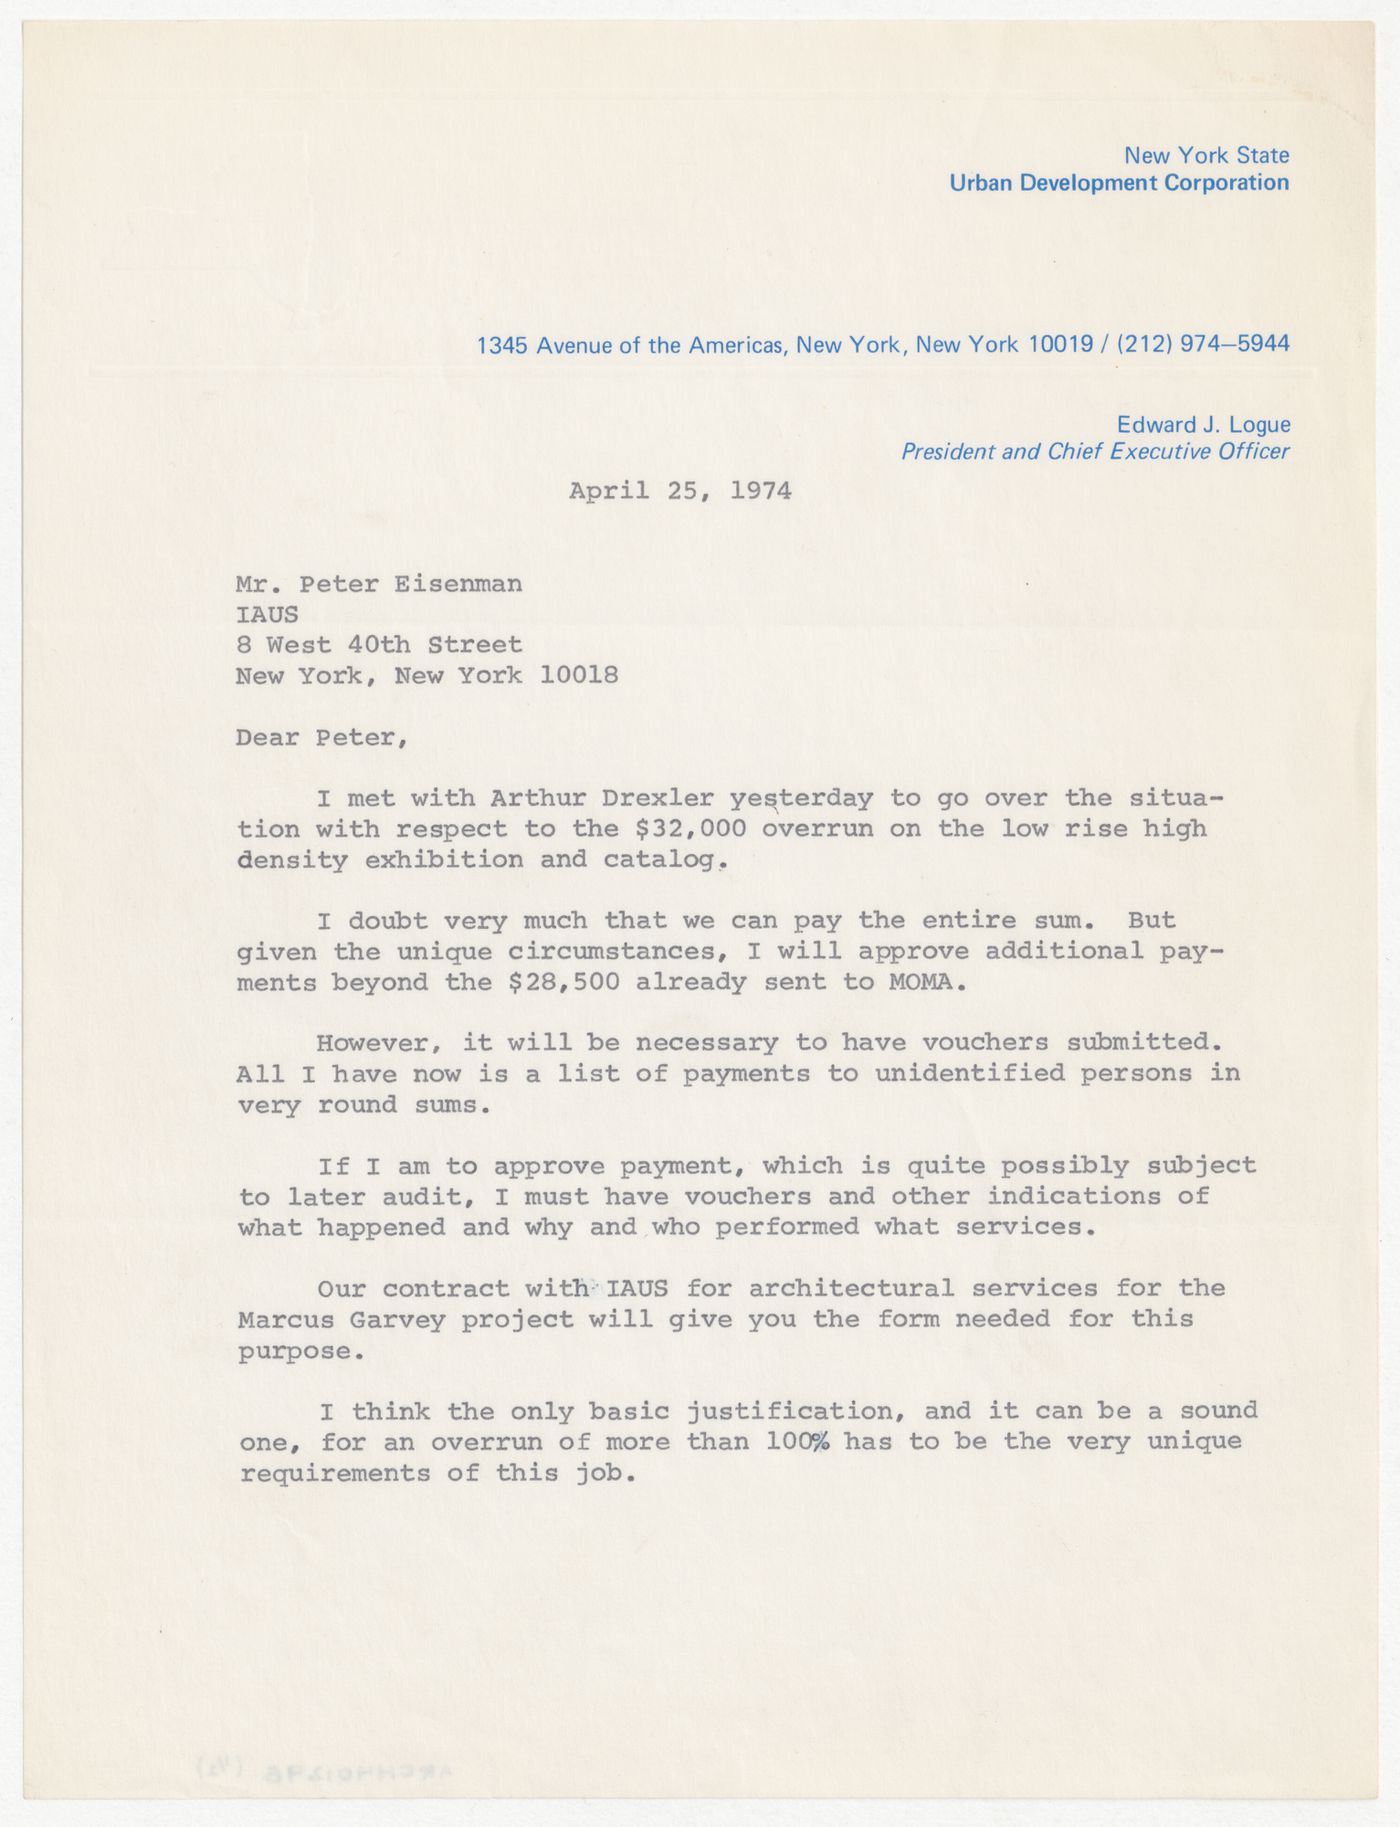 Letter from Edward J. Logue to Peter D. Eisenman about Low-Rise High-Density (LRHD) exhibition and catalog